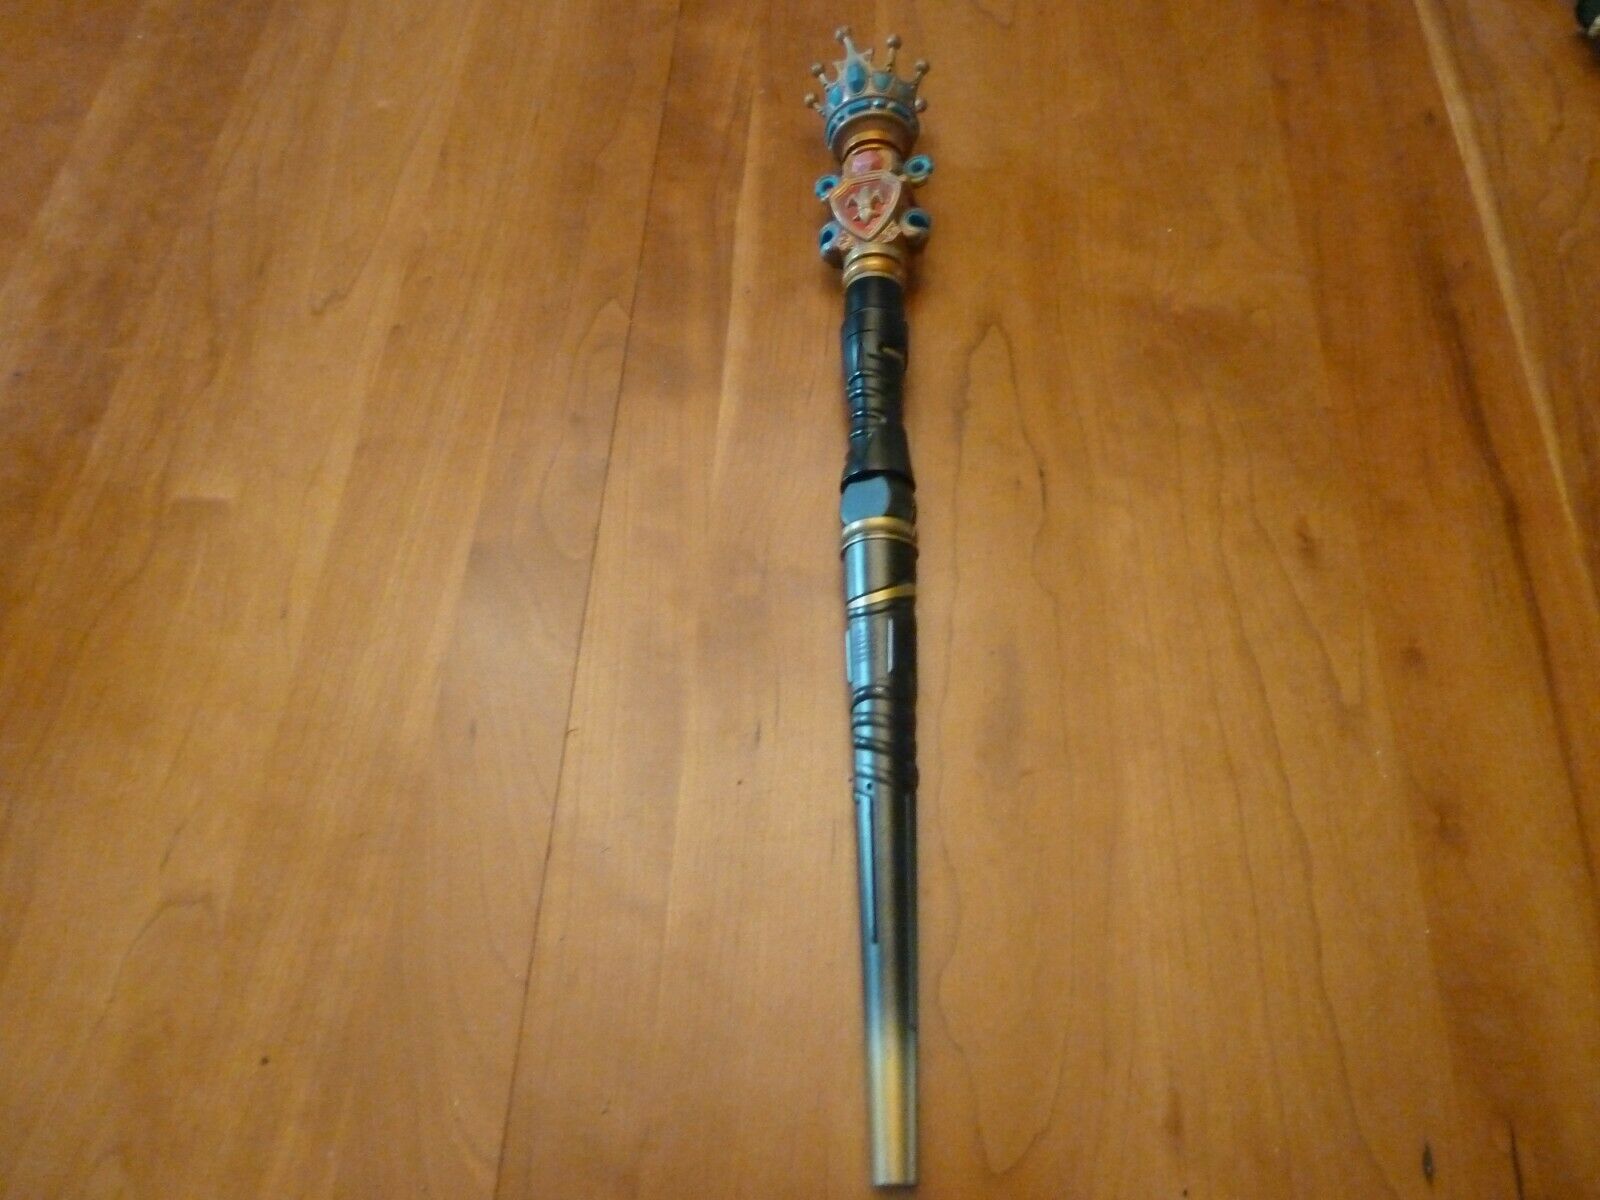 Magiquest Wand Great Wolf Lodge Crown Magic Quest Tested Works New Batteries